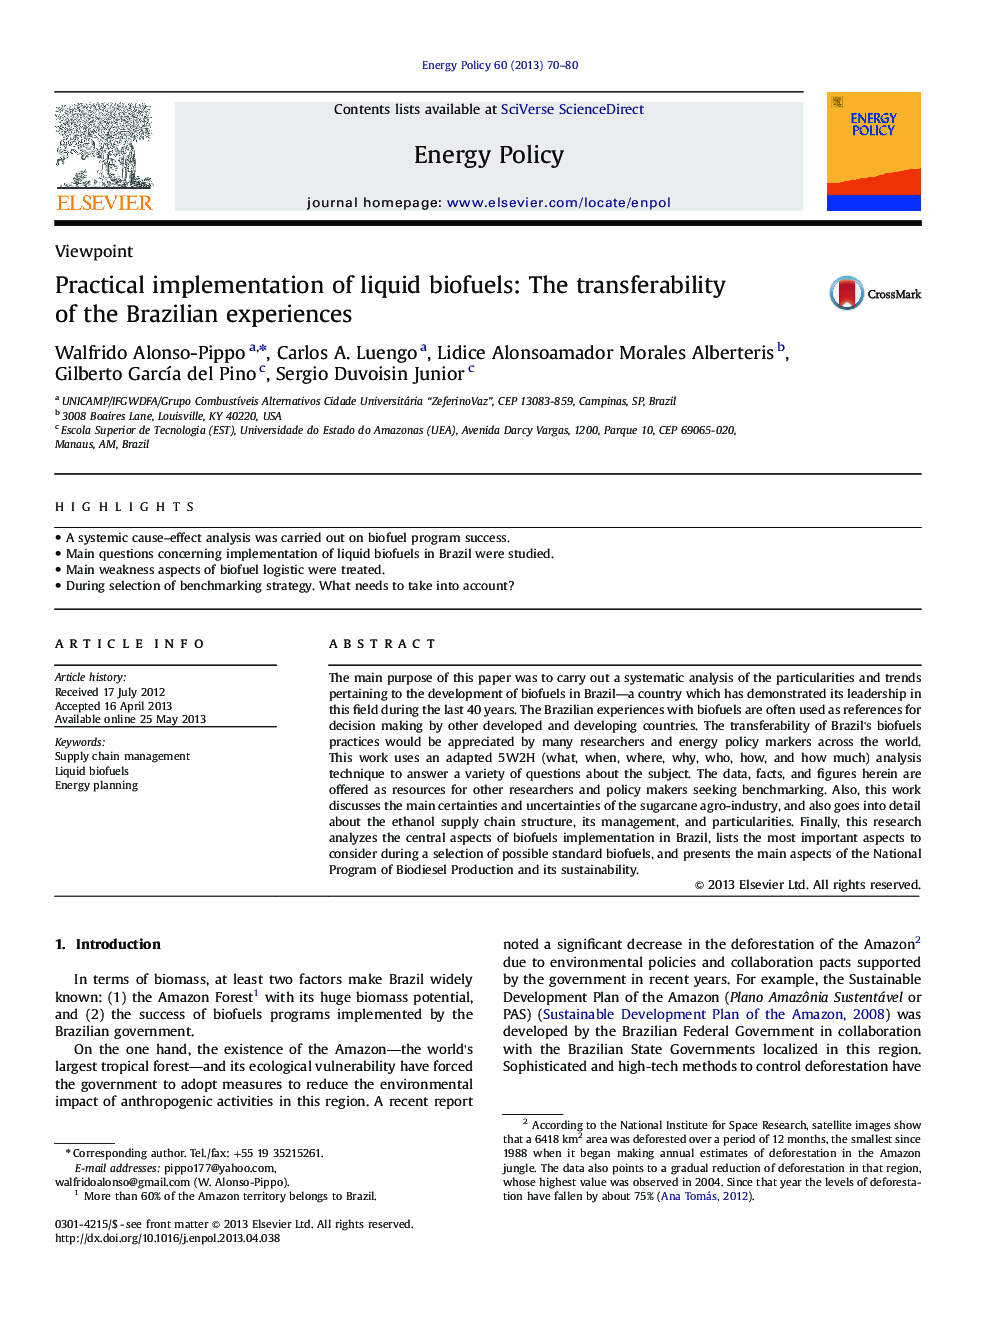 Practical implementation of liquid biofuels: The transferability of the Brazilian experiences